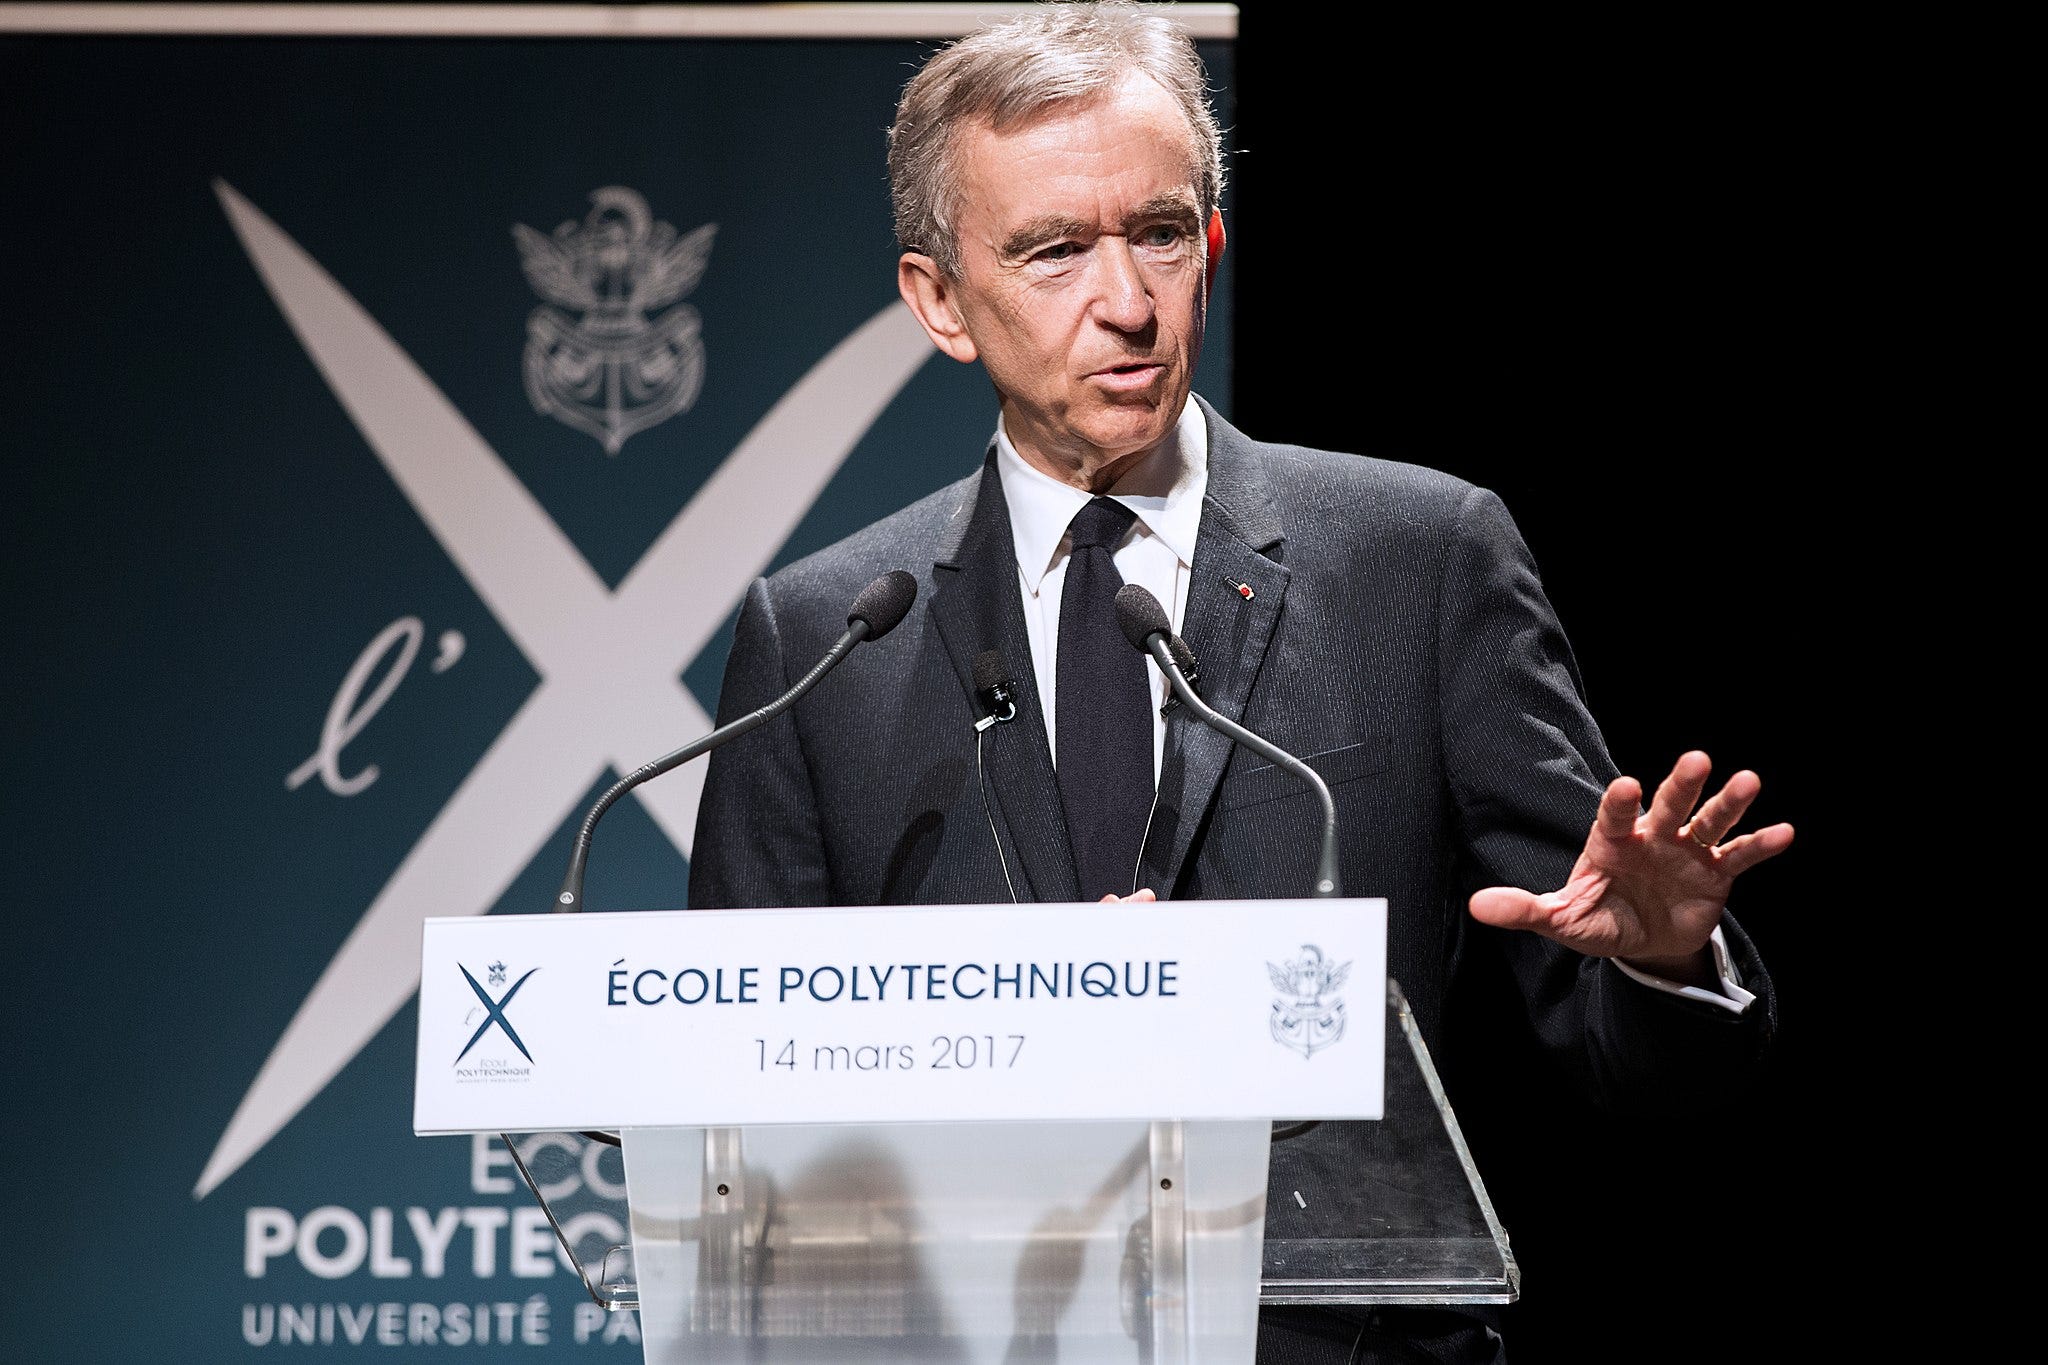 5 Things You Might Not Know About Bernard Arnault, The World's Richest Person (For Now)